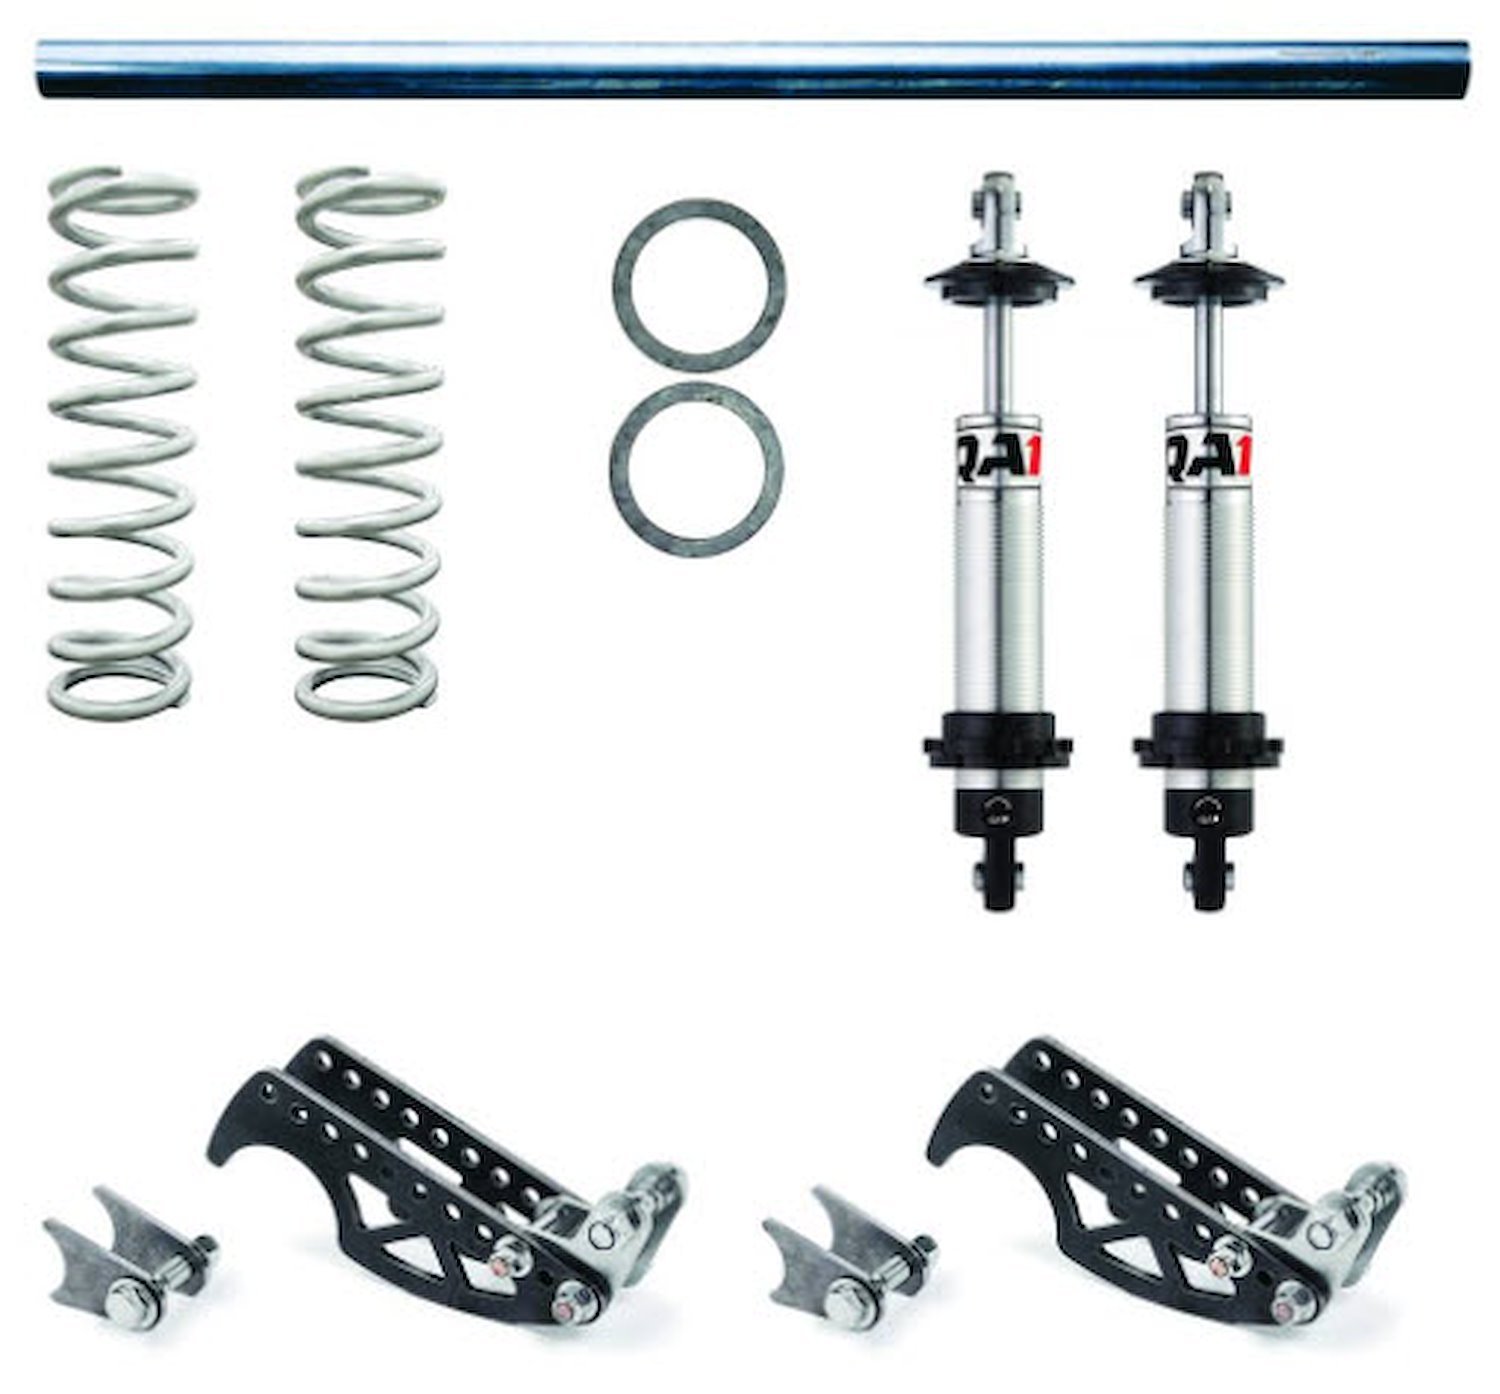 DS501-12200 Heavy-Duty Pro Rear Coil-Over Conversion System for 3 in. Axle Tubes w/Single-Adjustable Shocks & 200 lb. Springs